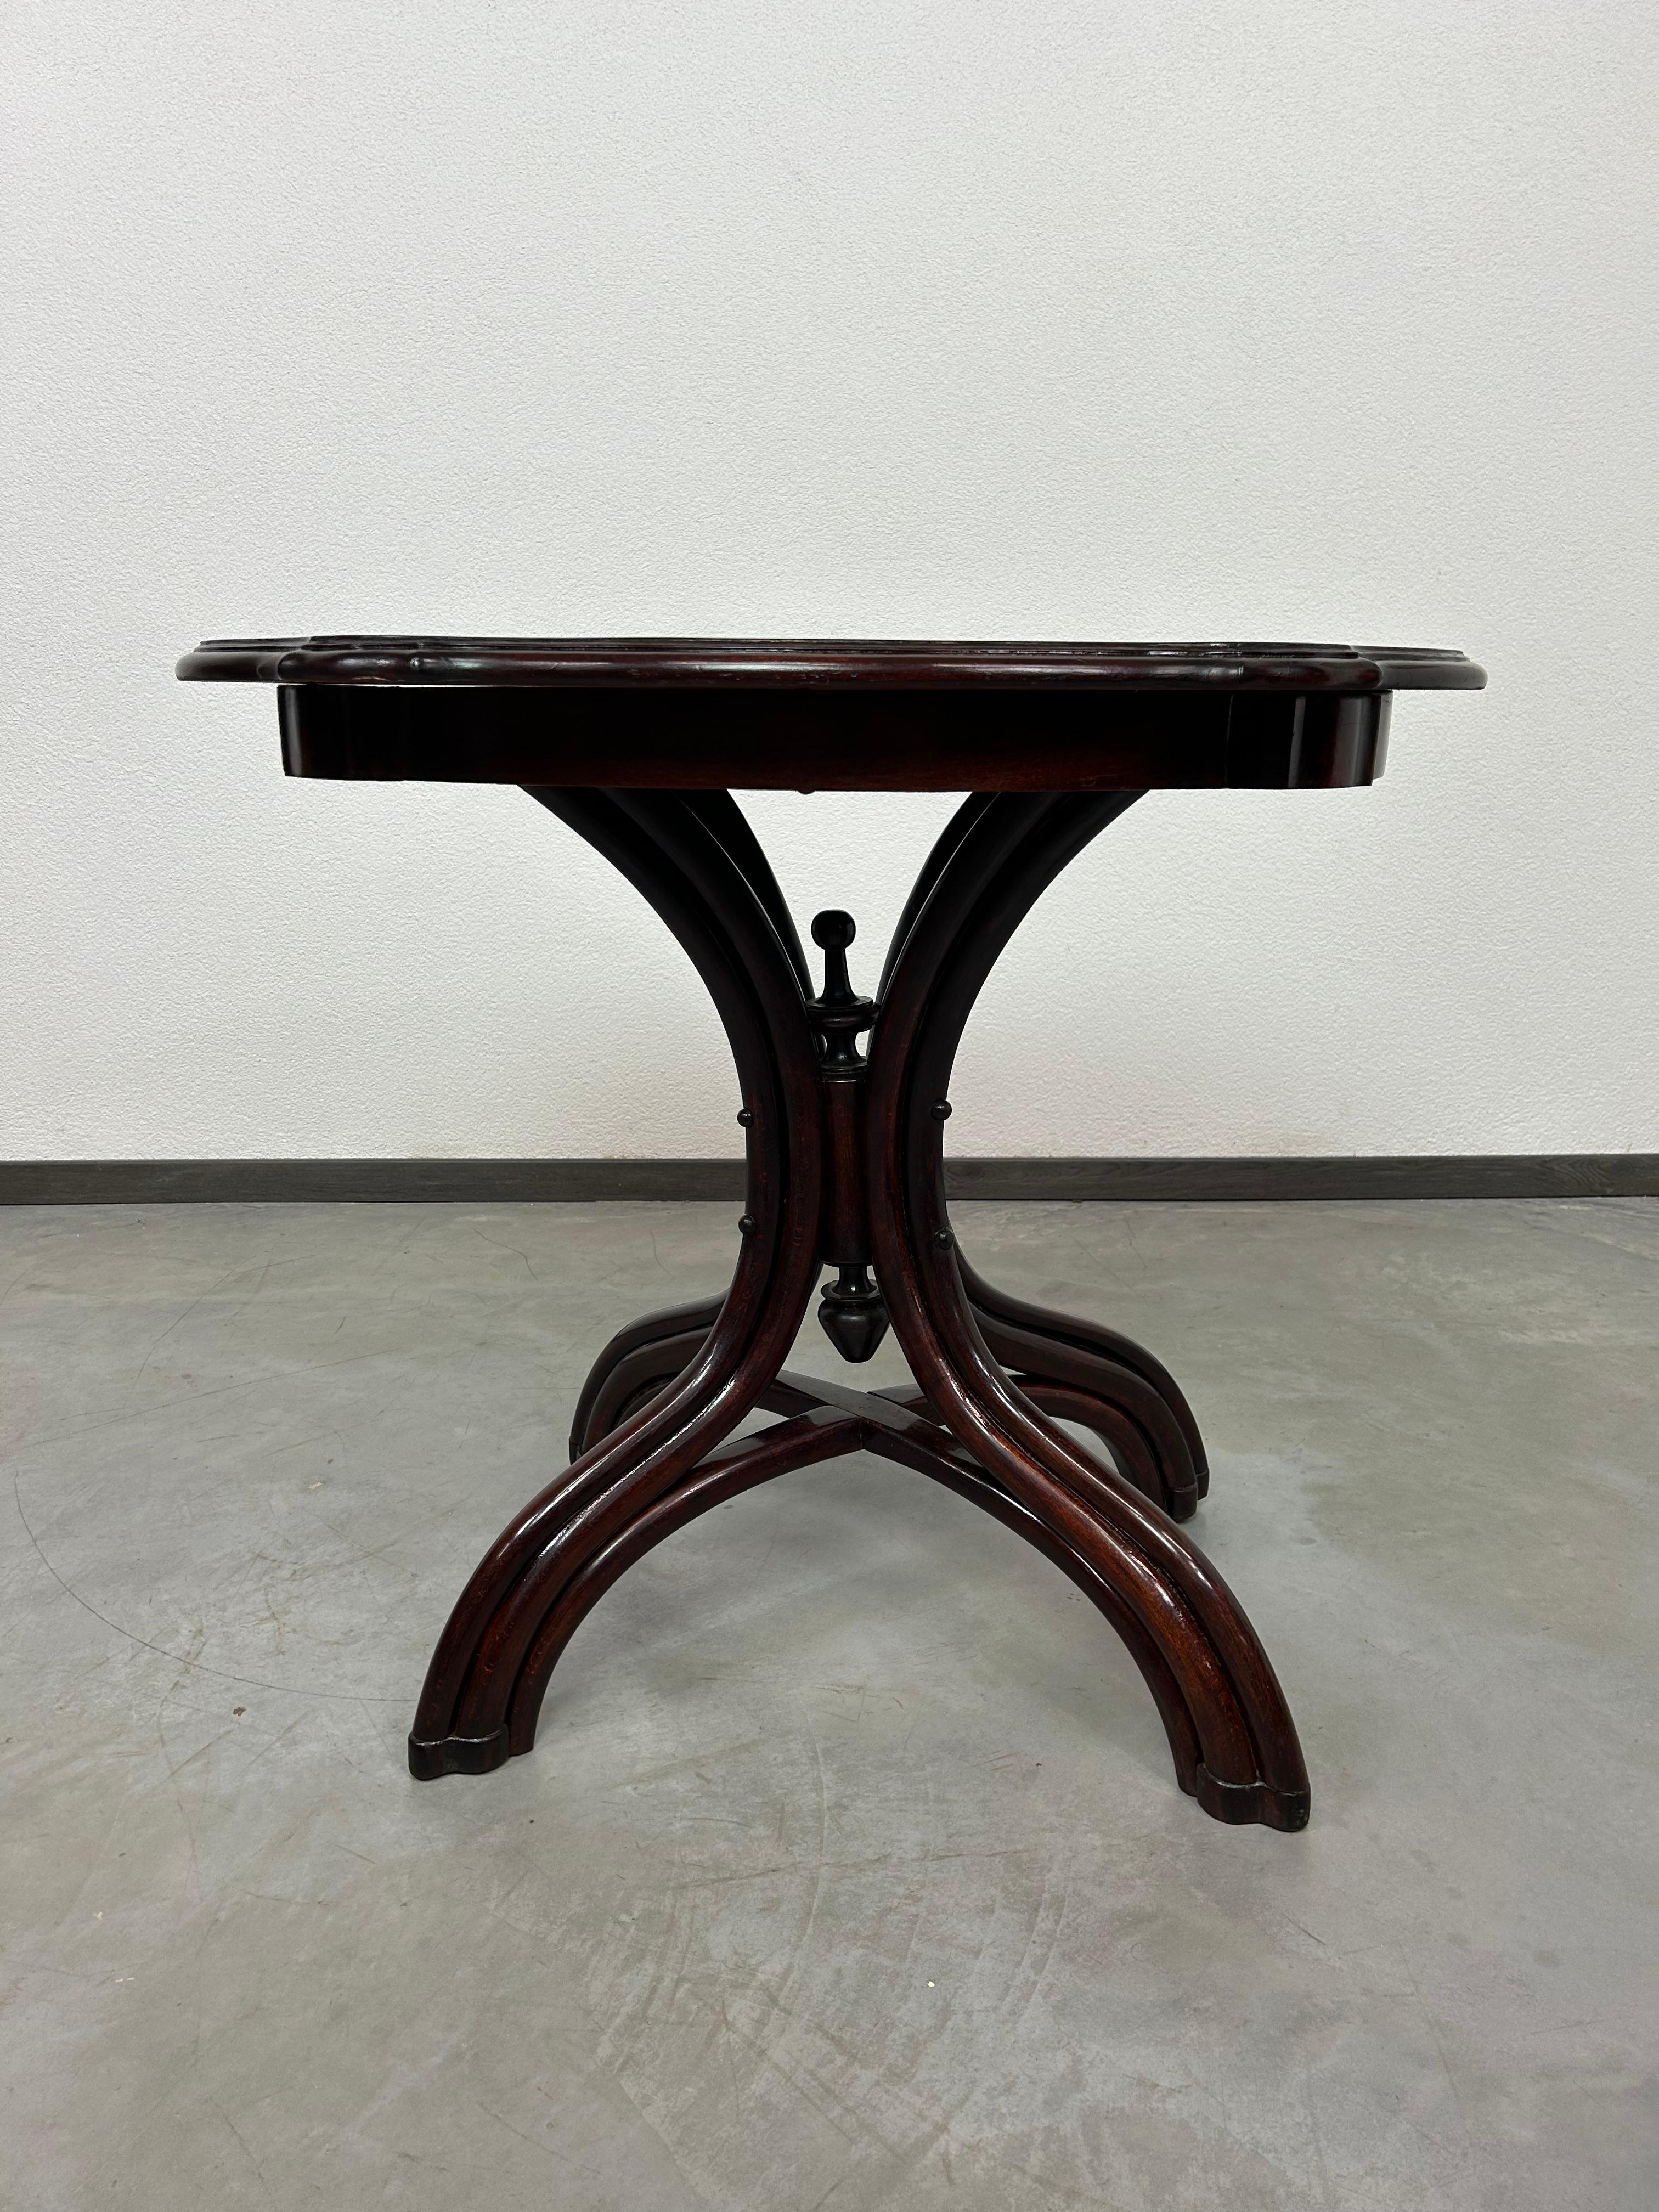 19th century bentwood Thonet table professionally stained and repolished.